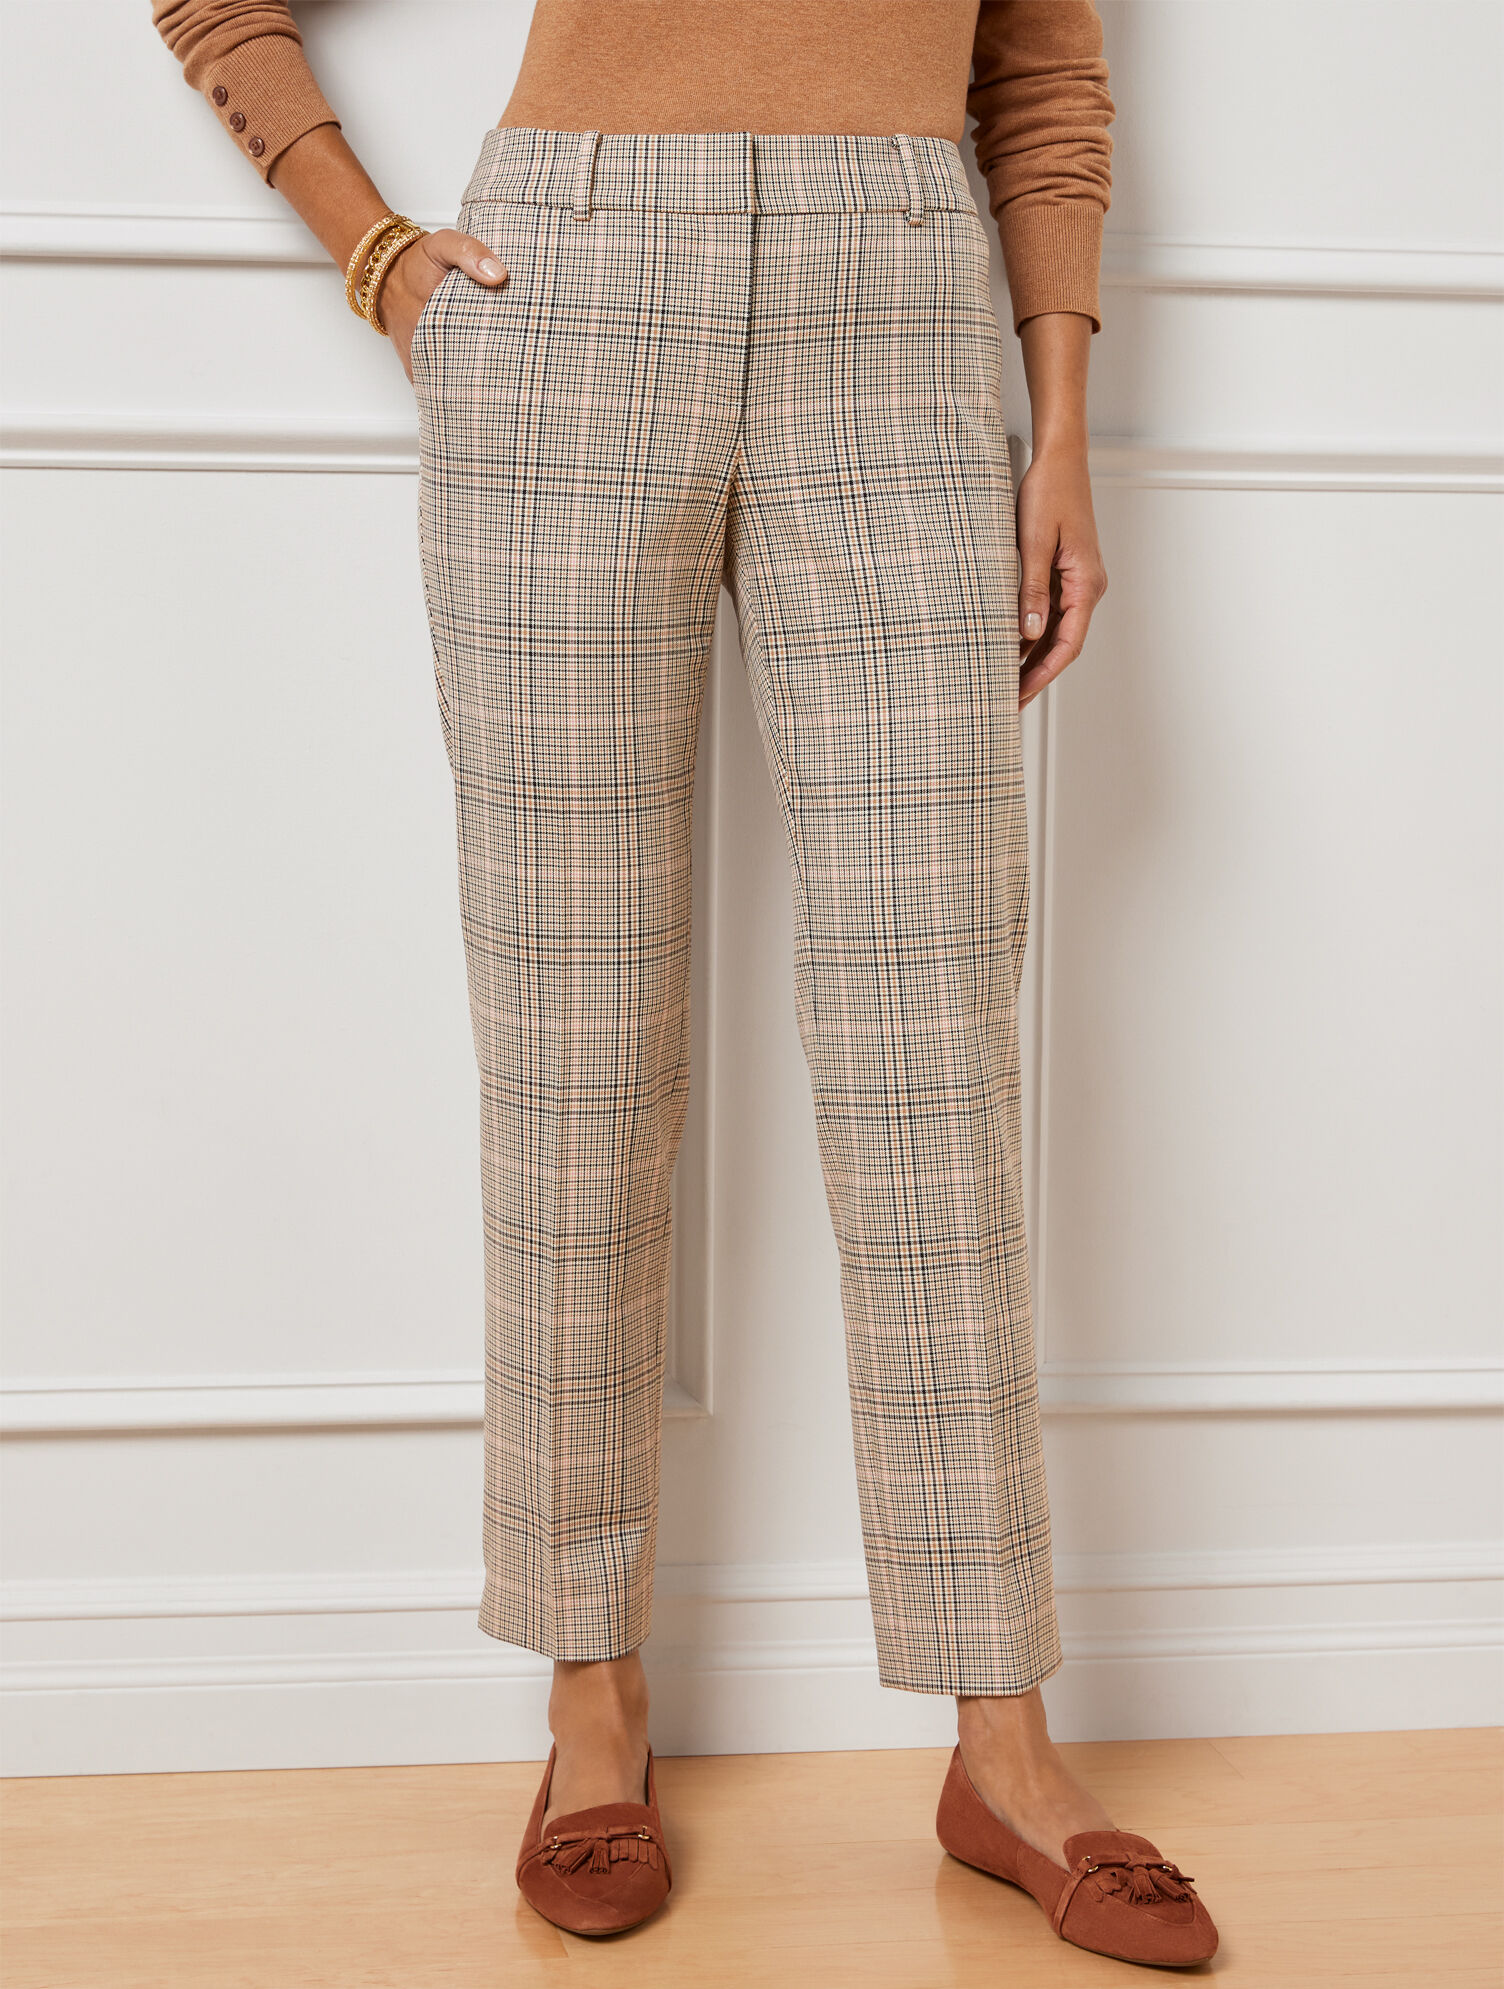 Talbots Hampshire Ankle Pants - Lined